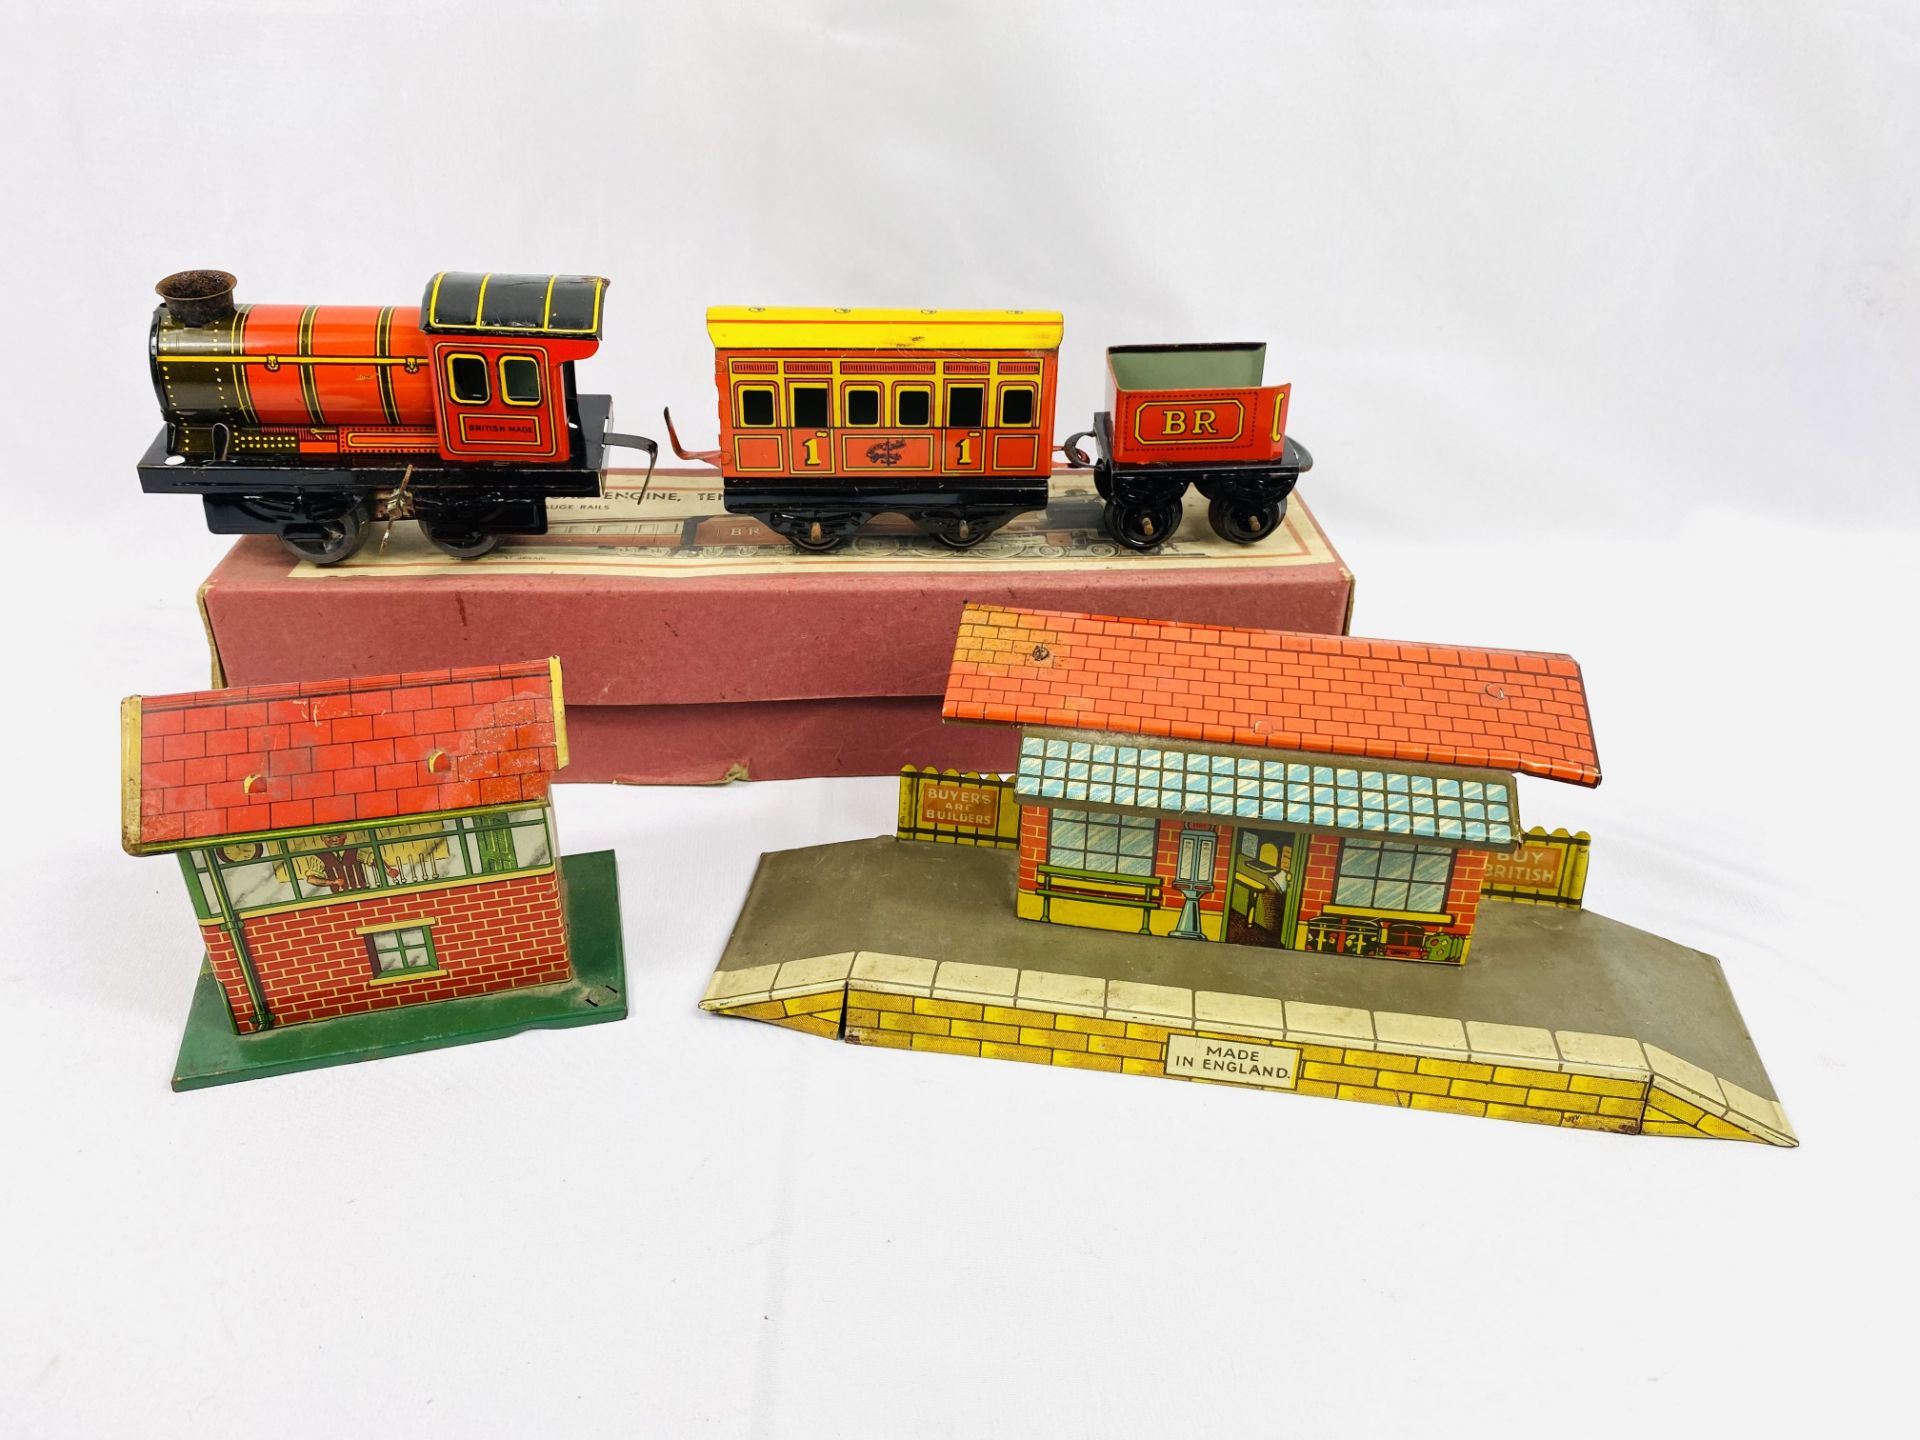 Boxed tinplate O gauge engine, tender and coach